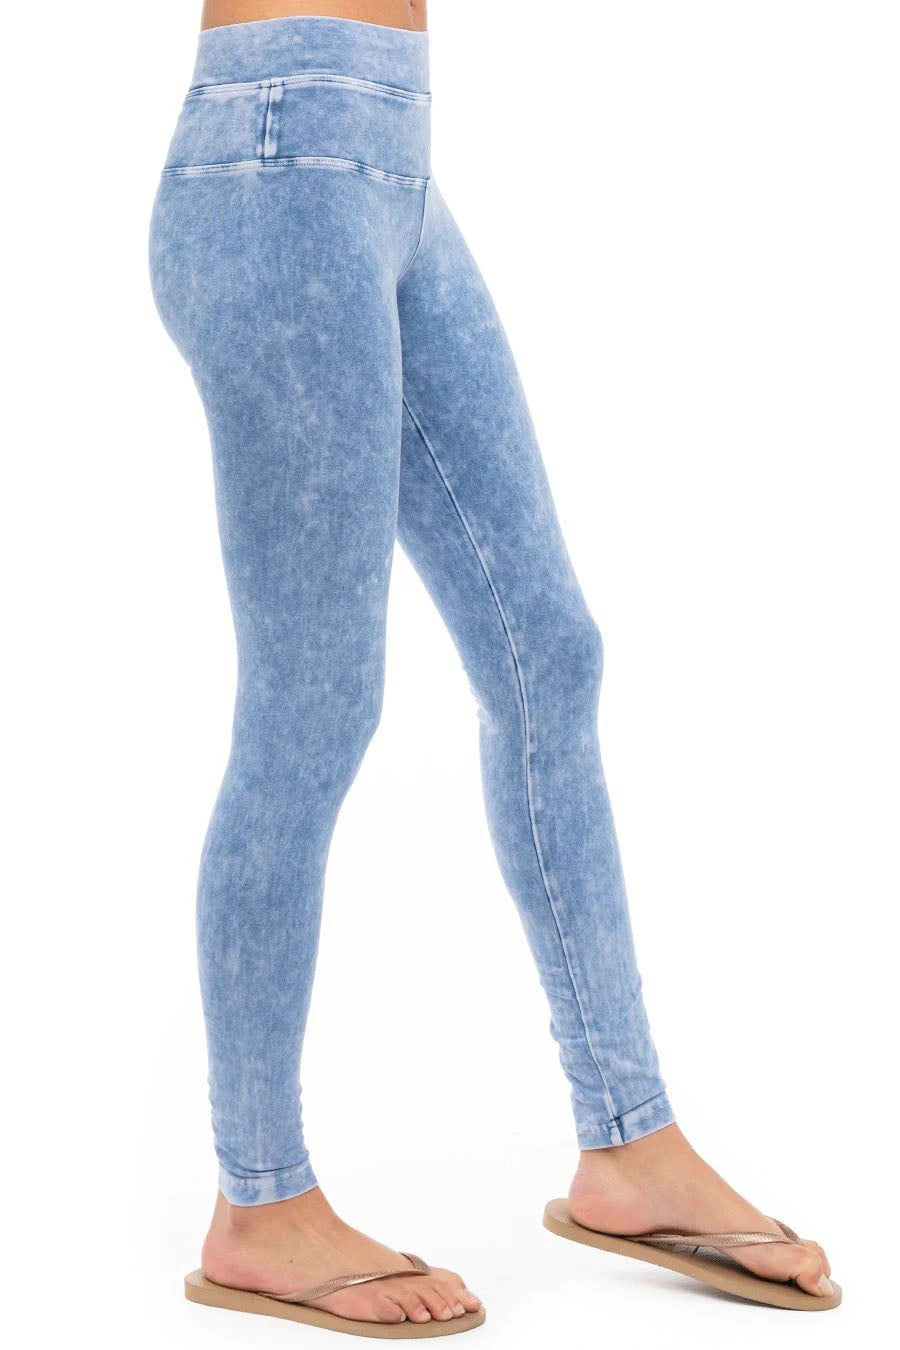 High Rise Ankle Legging (Style W-566, Dark Blue Mineral Wash MW8) by H -  Londo Lifestyle